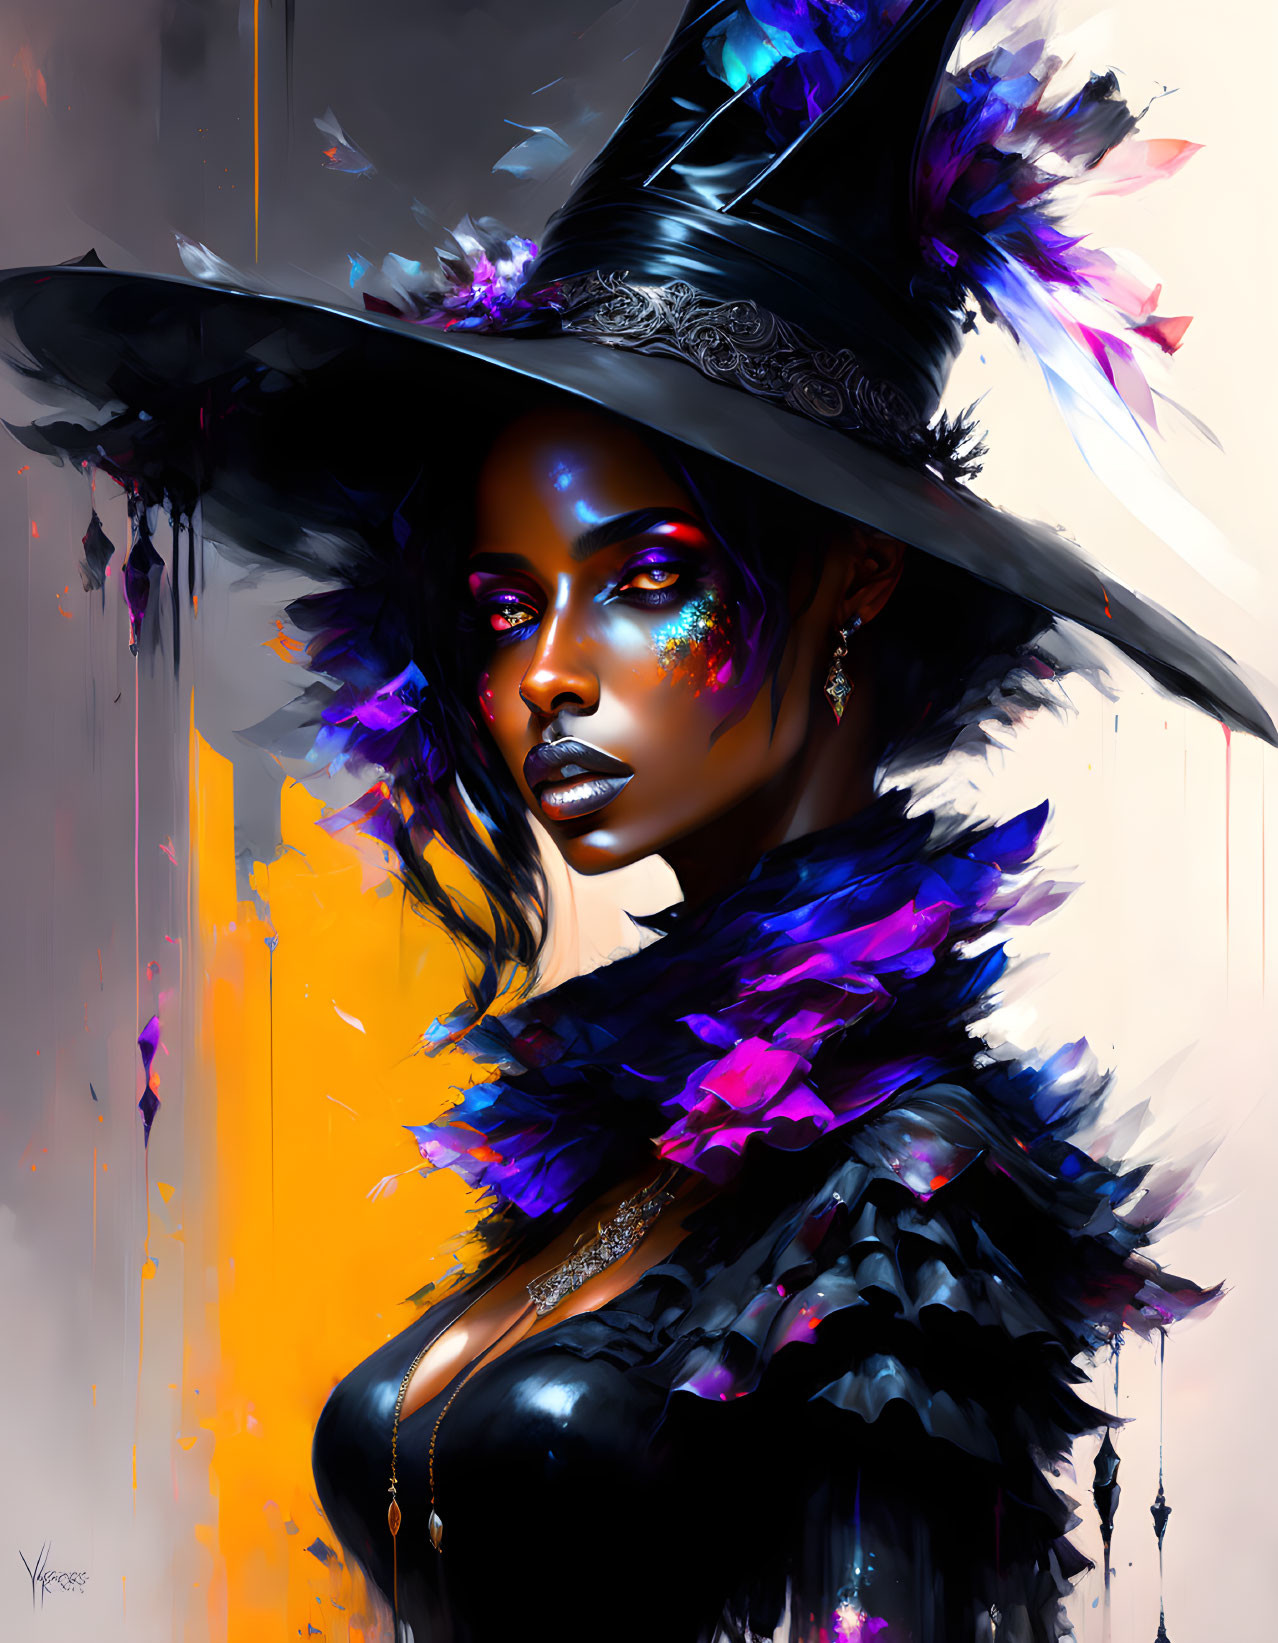 Colorful digital artwork of a dark-skinned woman with a feathered hat and mystical aura